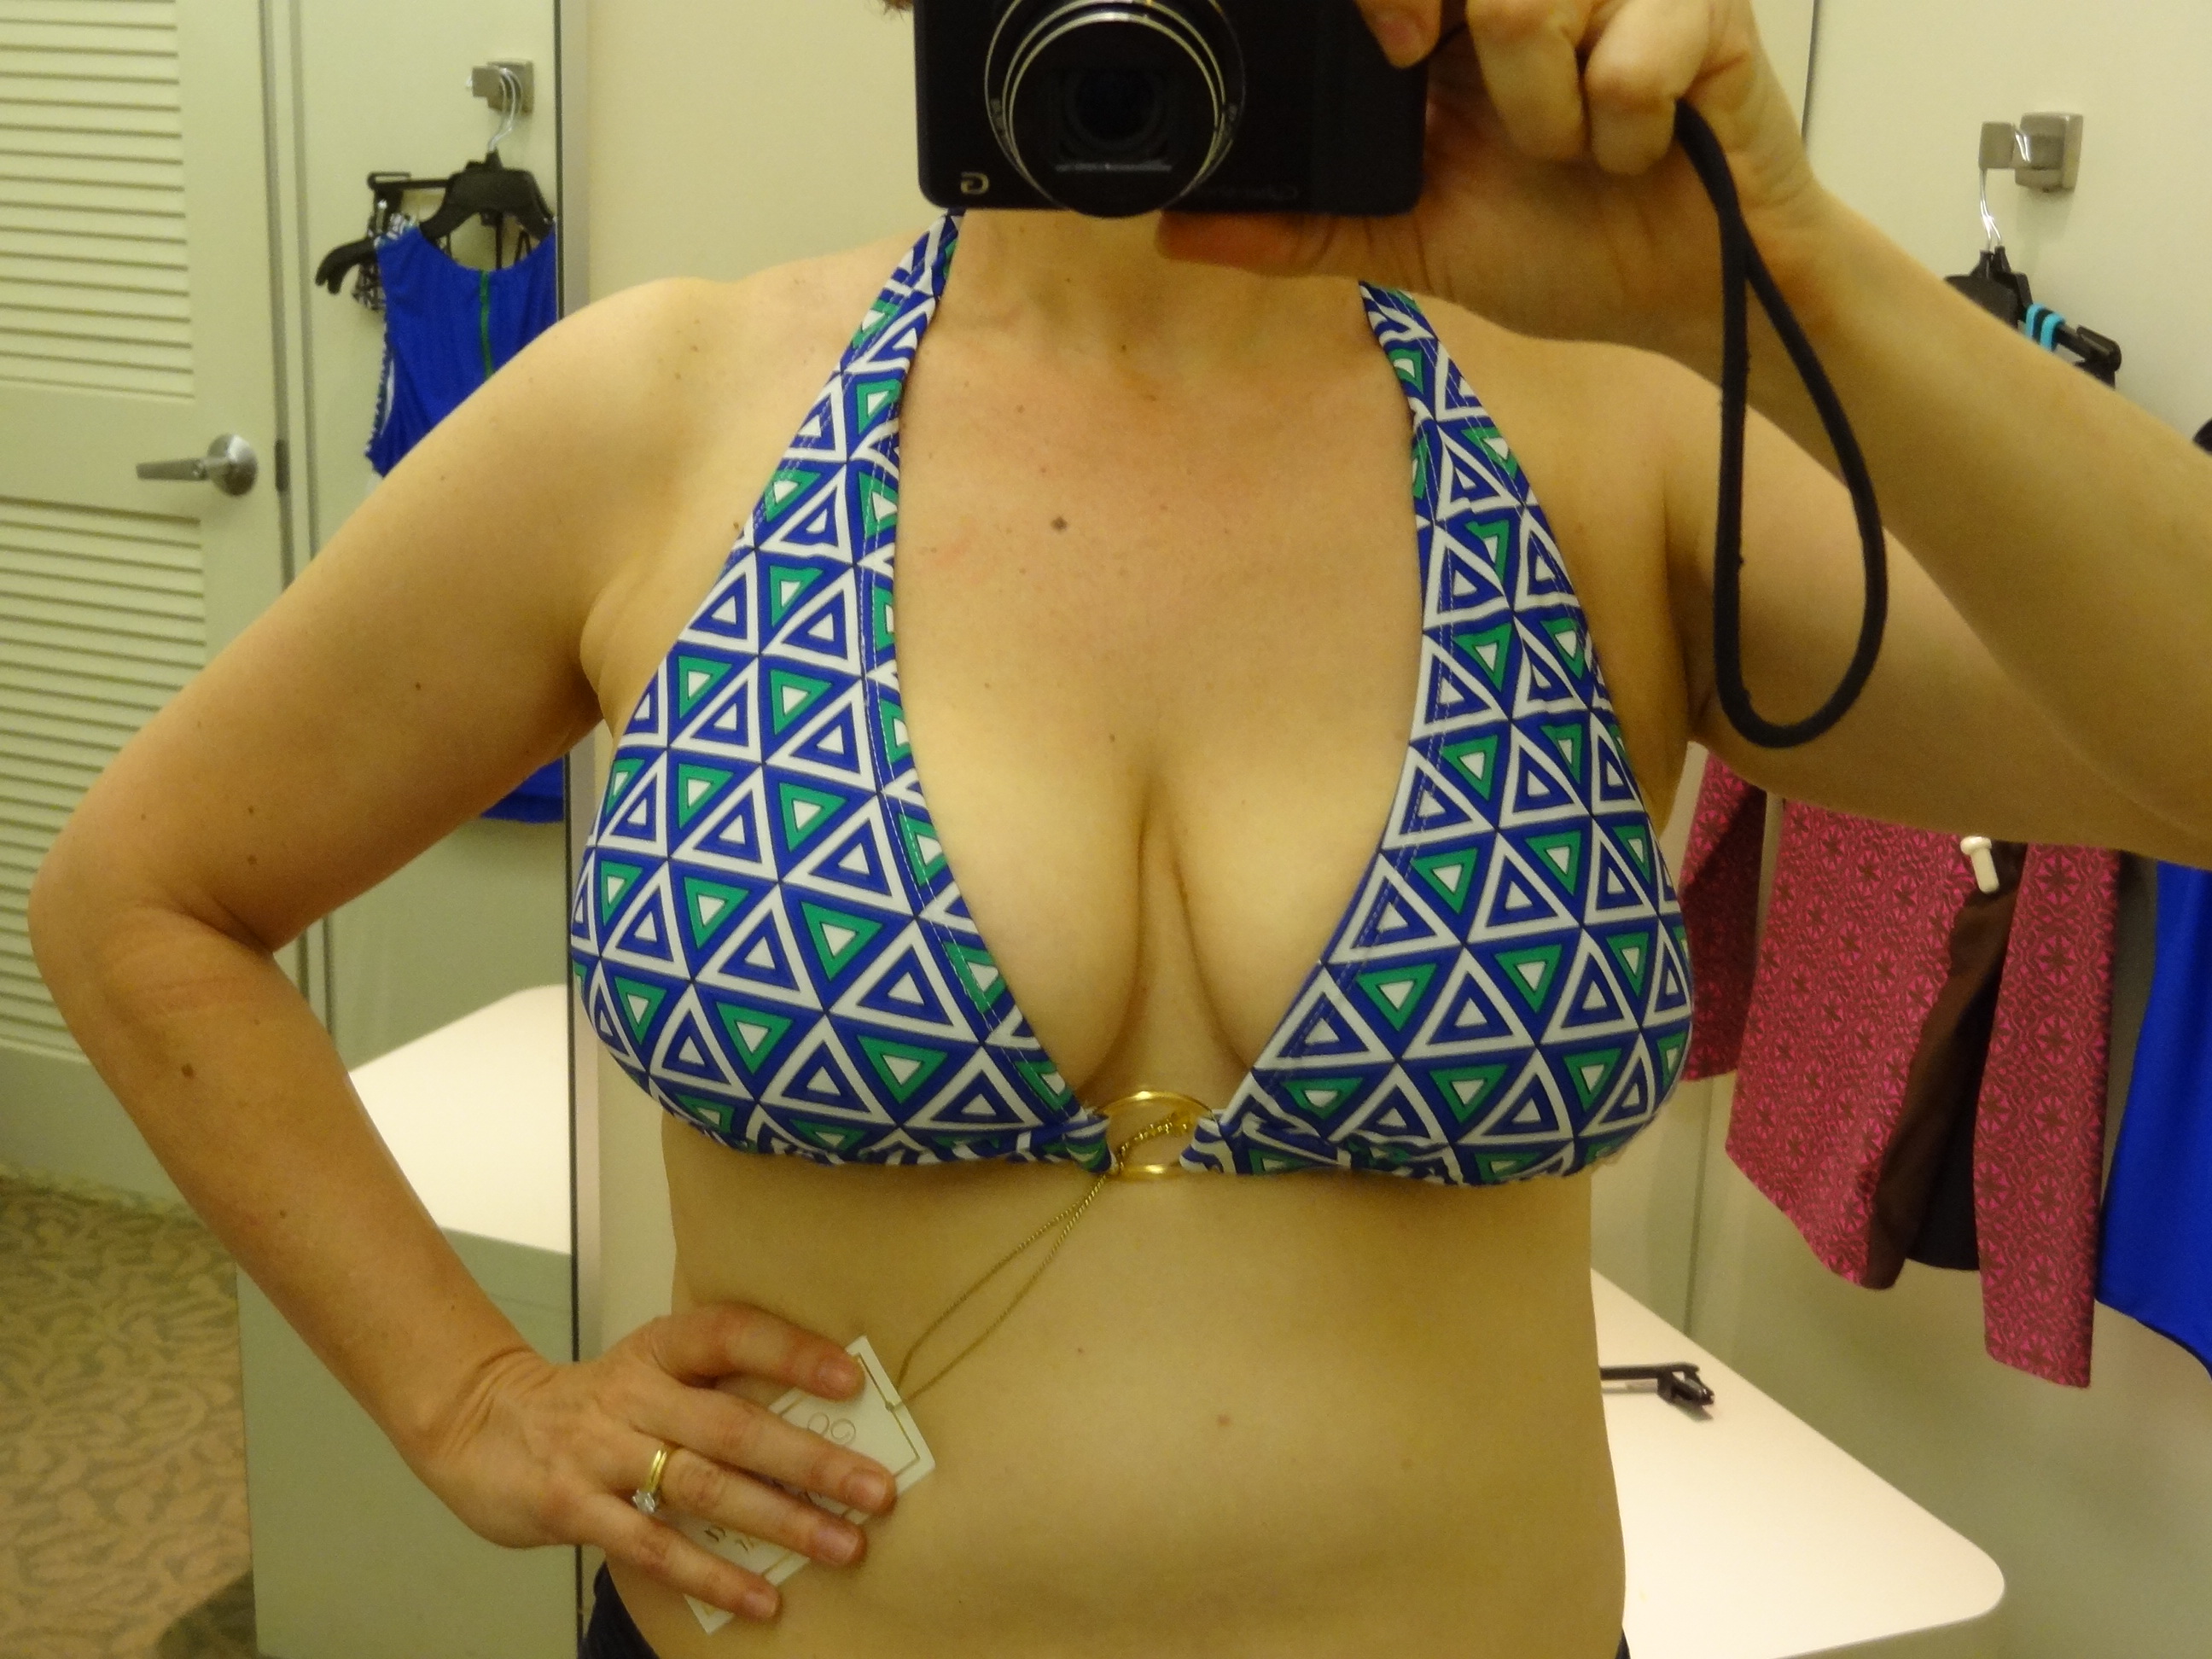 Full Bust Finds: DD Cup and Up Swimsuits in Regular Department